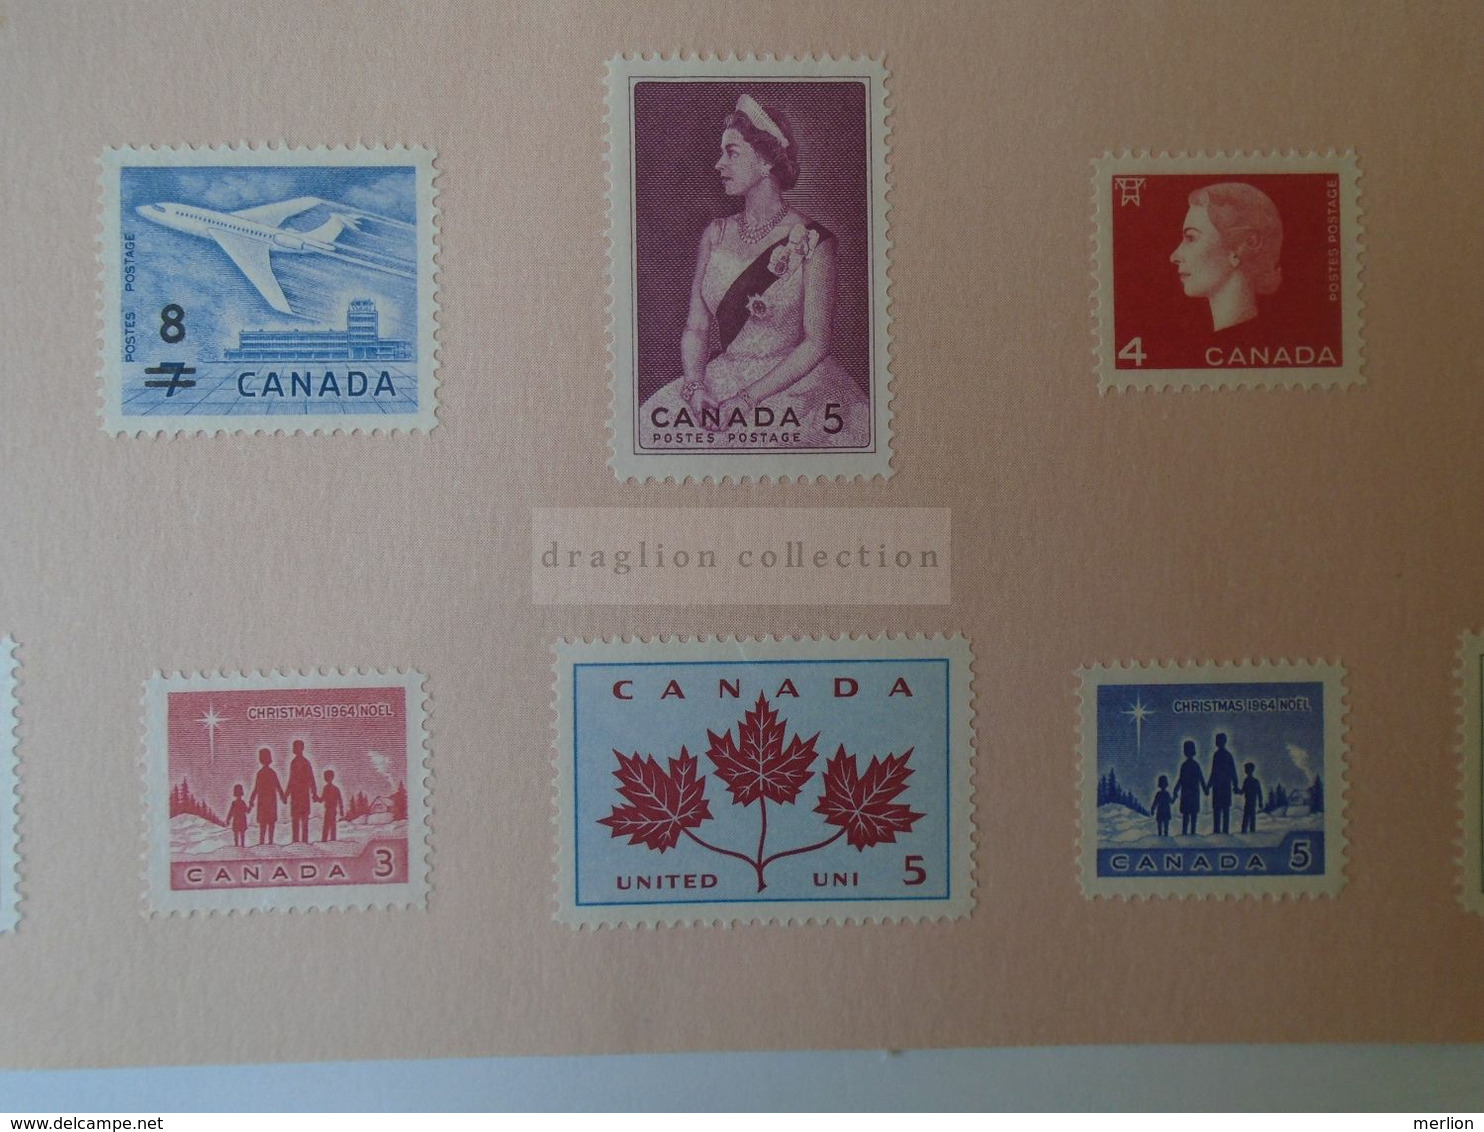 J1218   Canada 1964  Lot Of  2  Souvenir Cards  With Stamps Attached   1964/65 - Canada Post Year Sets/merchandise